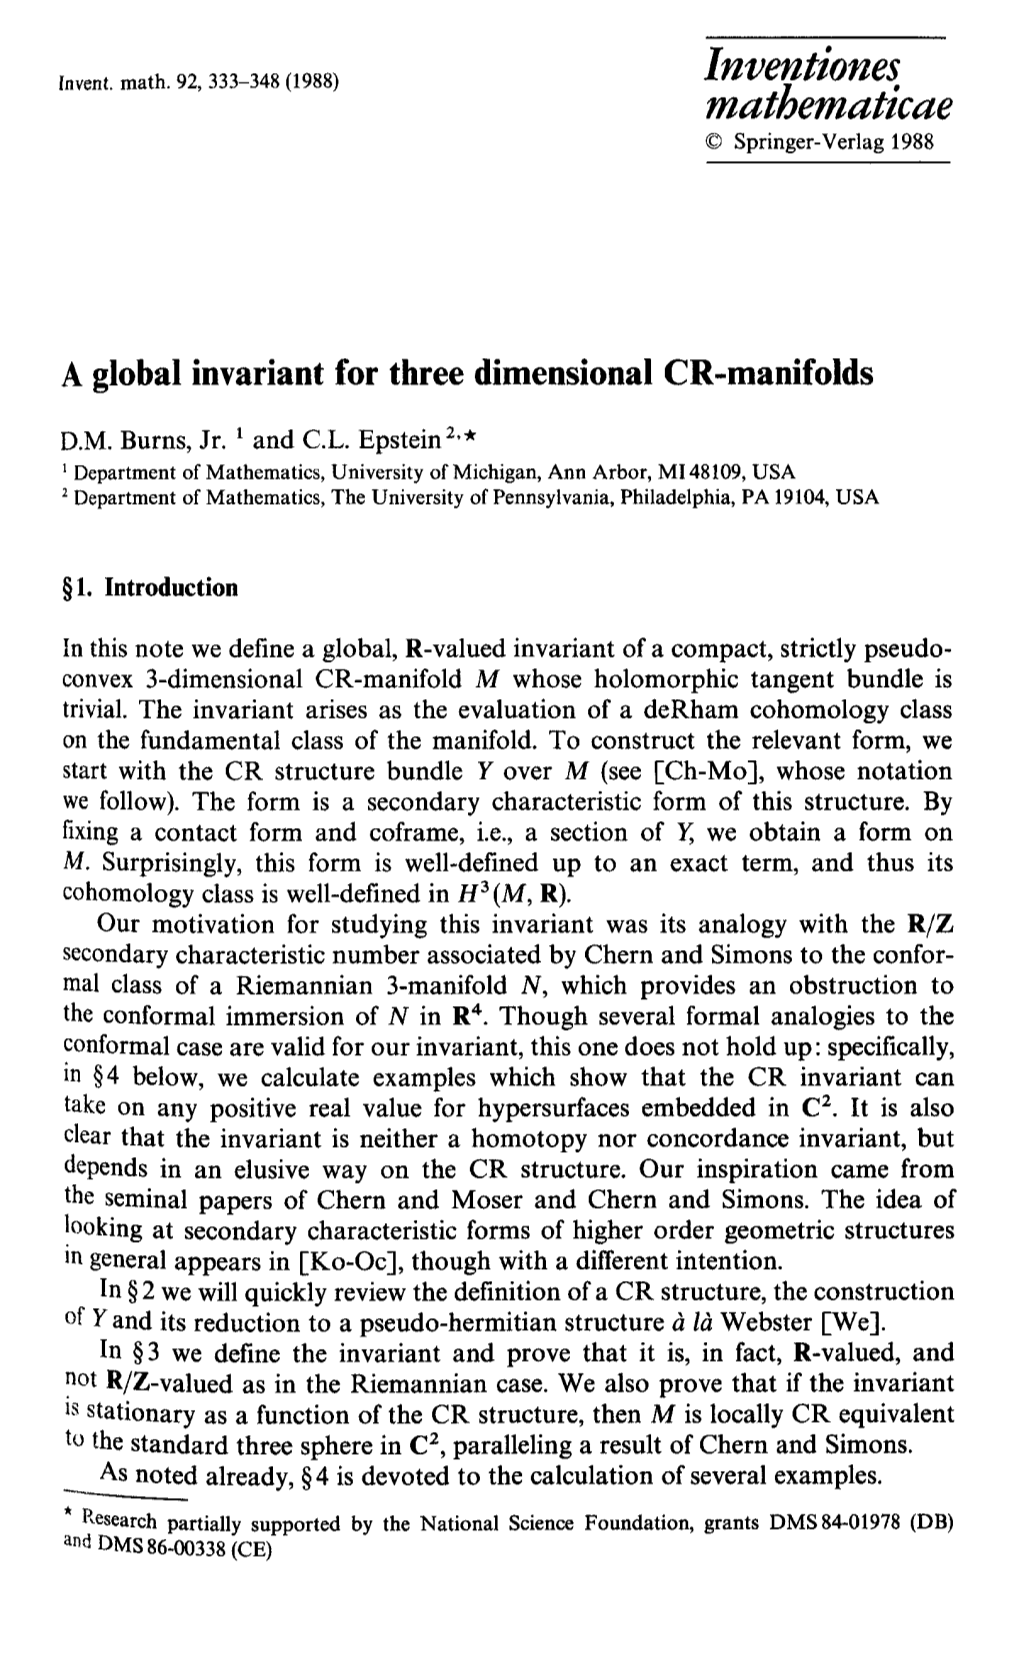 A Global Invariant for Three Dimensional CR-Manifolds